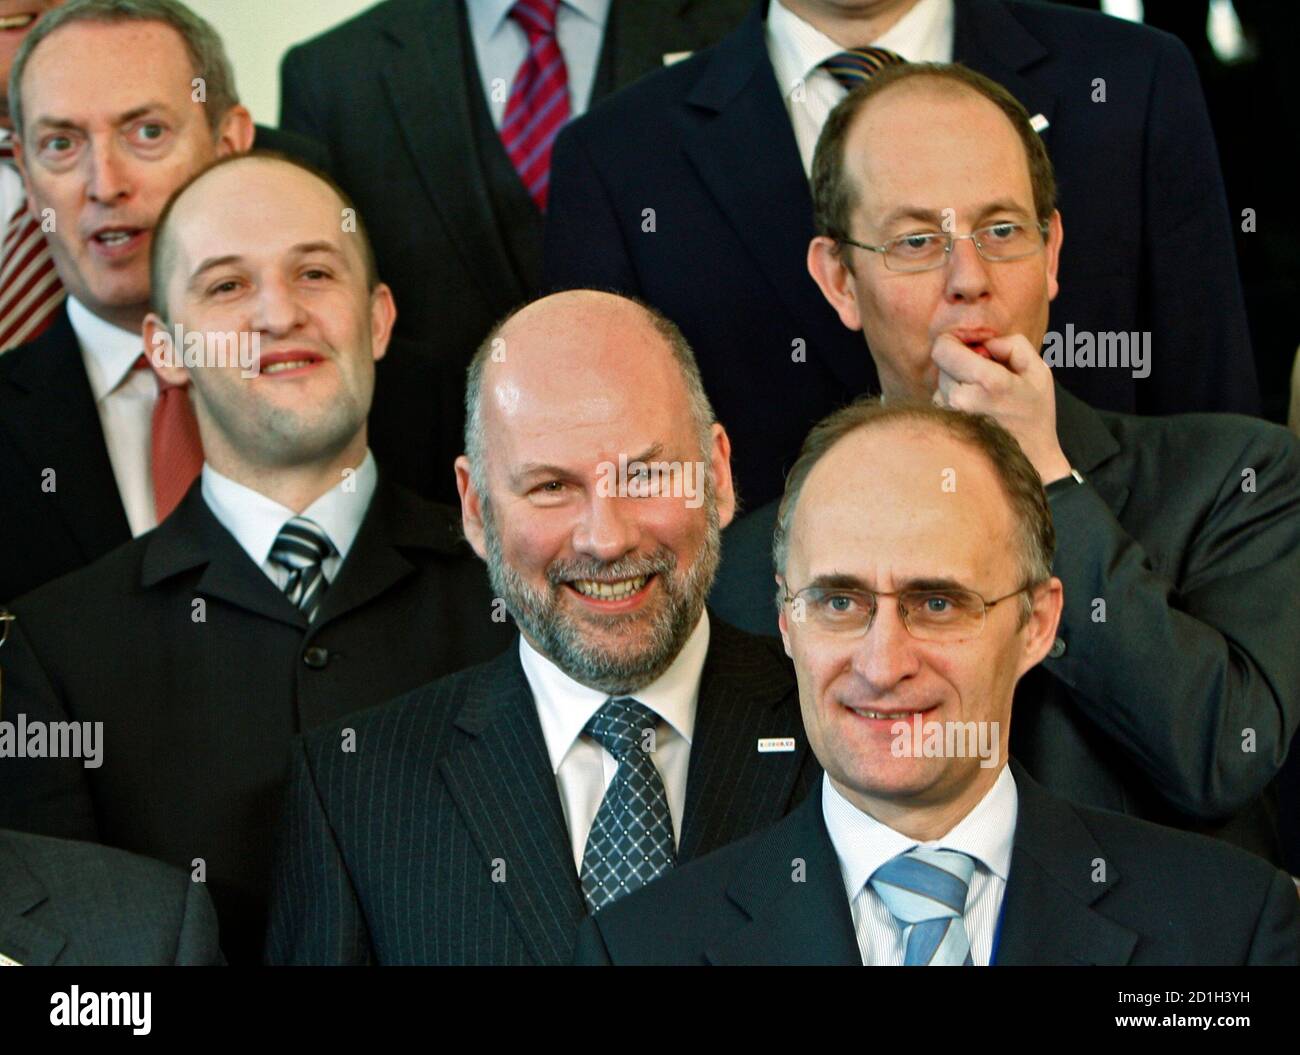 Britain's Defence Minister John Hutton, Latvia's Janis Sarts, Ireland's  Michael Howard, Belgium's Geert Muylle (L-R) and Luxembourg's Aid Minister  Jean-louis Schiltz (R) react as they wait for a family photo of the